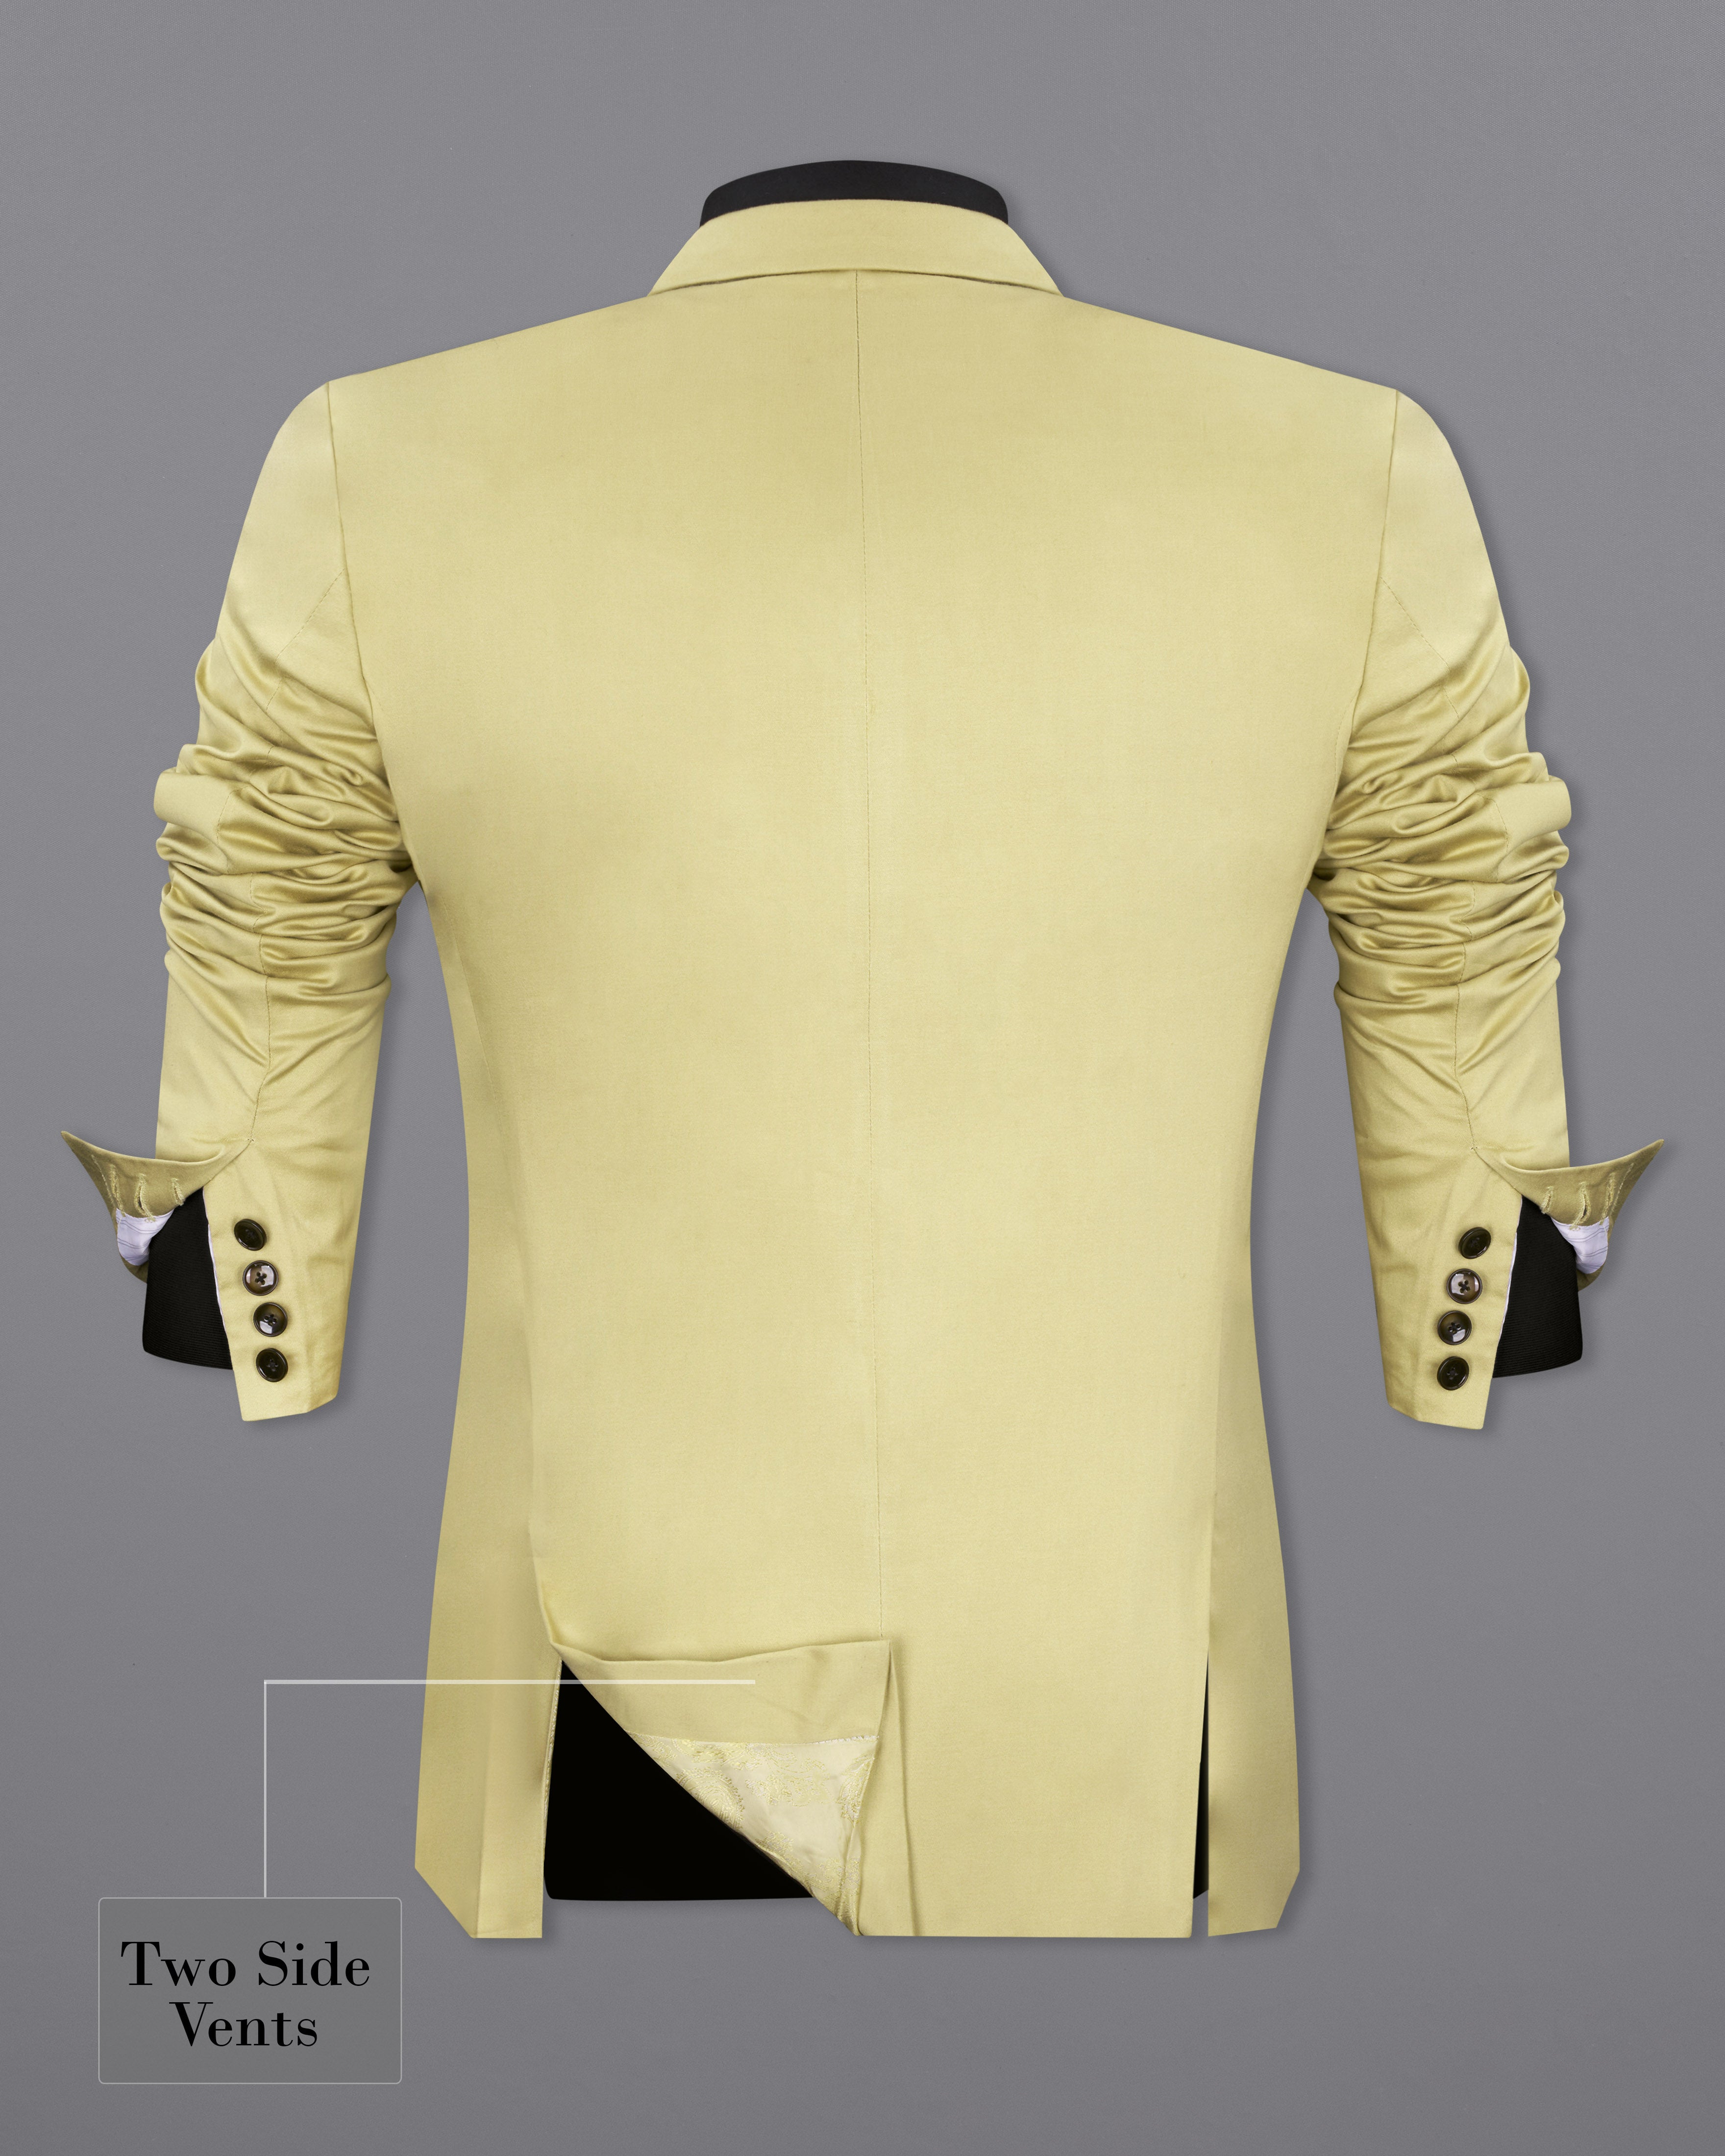 Maize Light Brown Stretchable Double Breasted Premium Cotton traveler Suit ST2658-DB-36,ST2658-DB-38,ST2658-DB-40,ST2658-DB-42,ST2658-DB-44,ST2658-DB-46,ST2658-DB-48,ST2658-DB-50,ST2658-DB-52,ST2658-DB-54,ST2658-DB-56,ST2658-DB-58,ST2658-DB-60